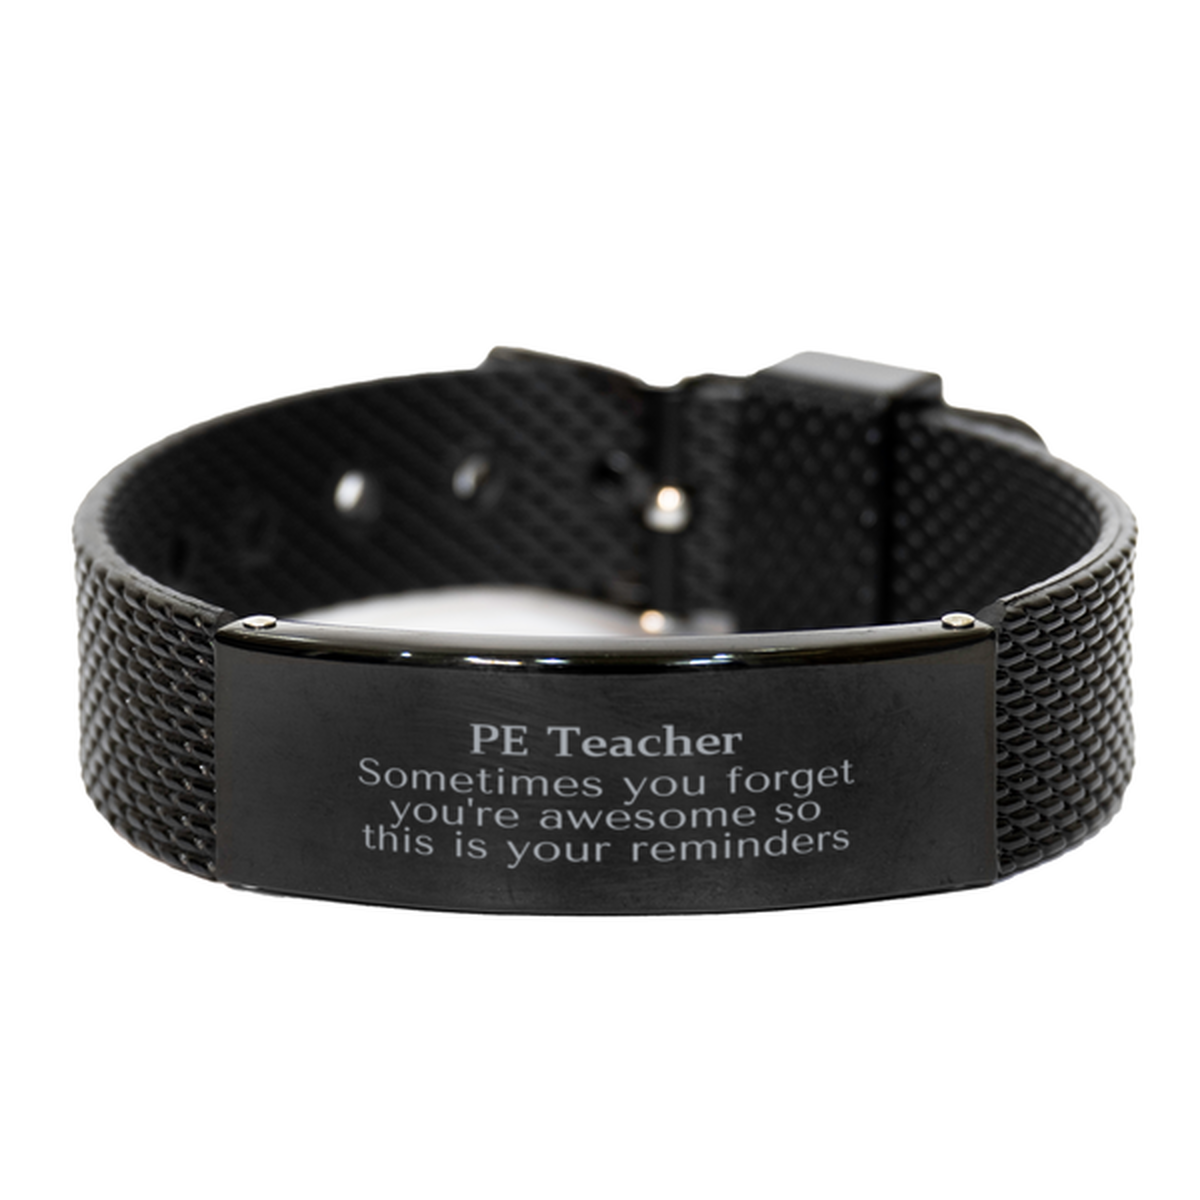 Sentimental PE Teacher Black Shark Mesh Bracelet, PE Teacher Sometimes you forget you're awesome so this is your reminders, Graduation Christmas Birthday Gifts for PE Teacher, Men, Women, Coworkers